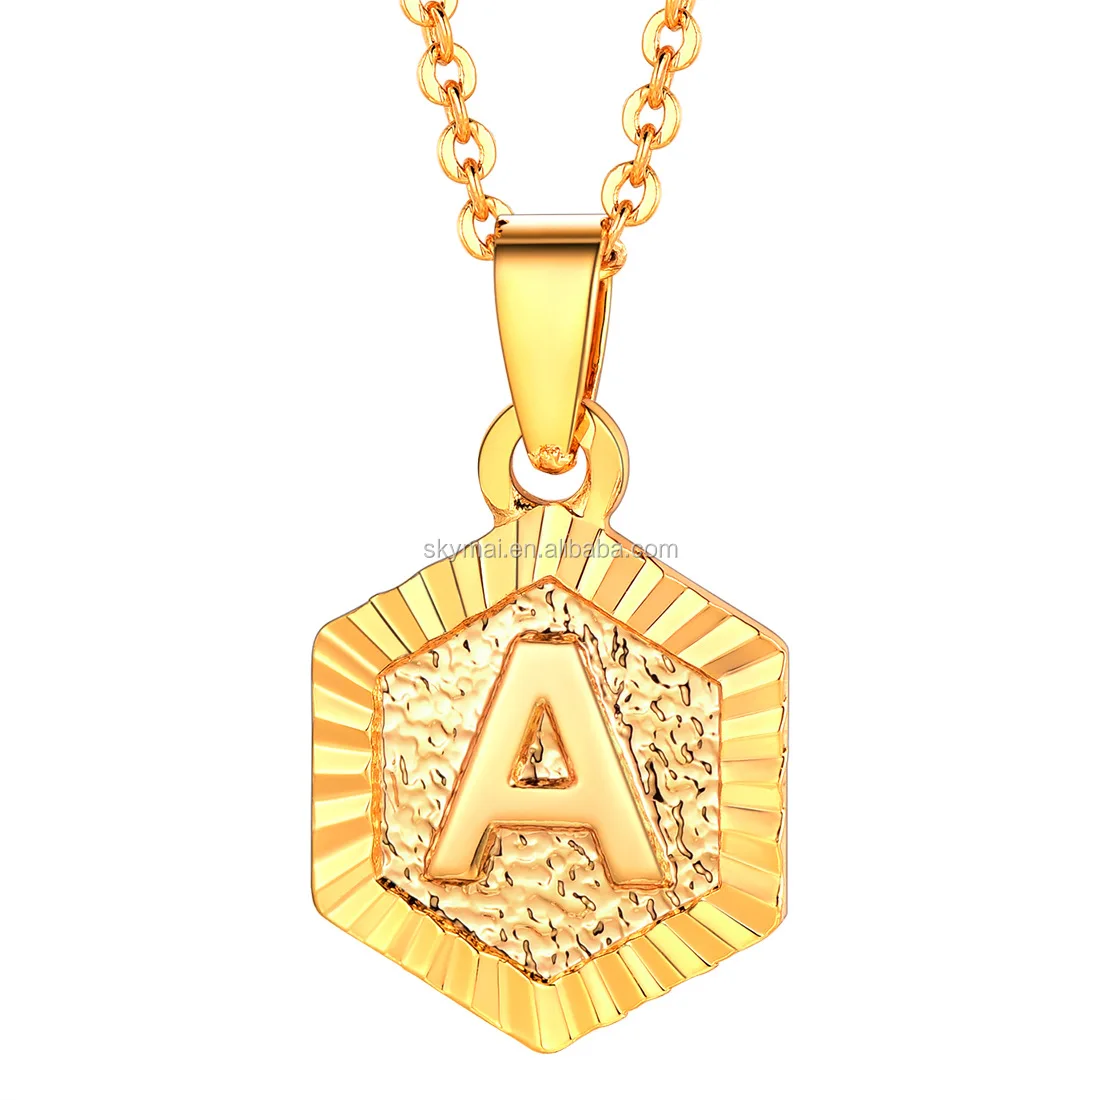 Stainless steel gold Letter necklace initial letter pendant necklace